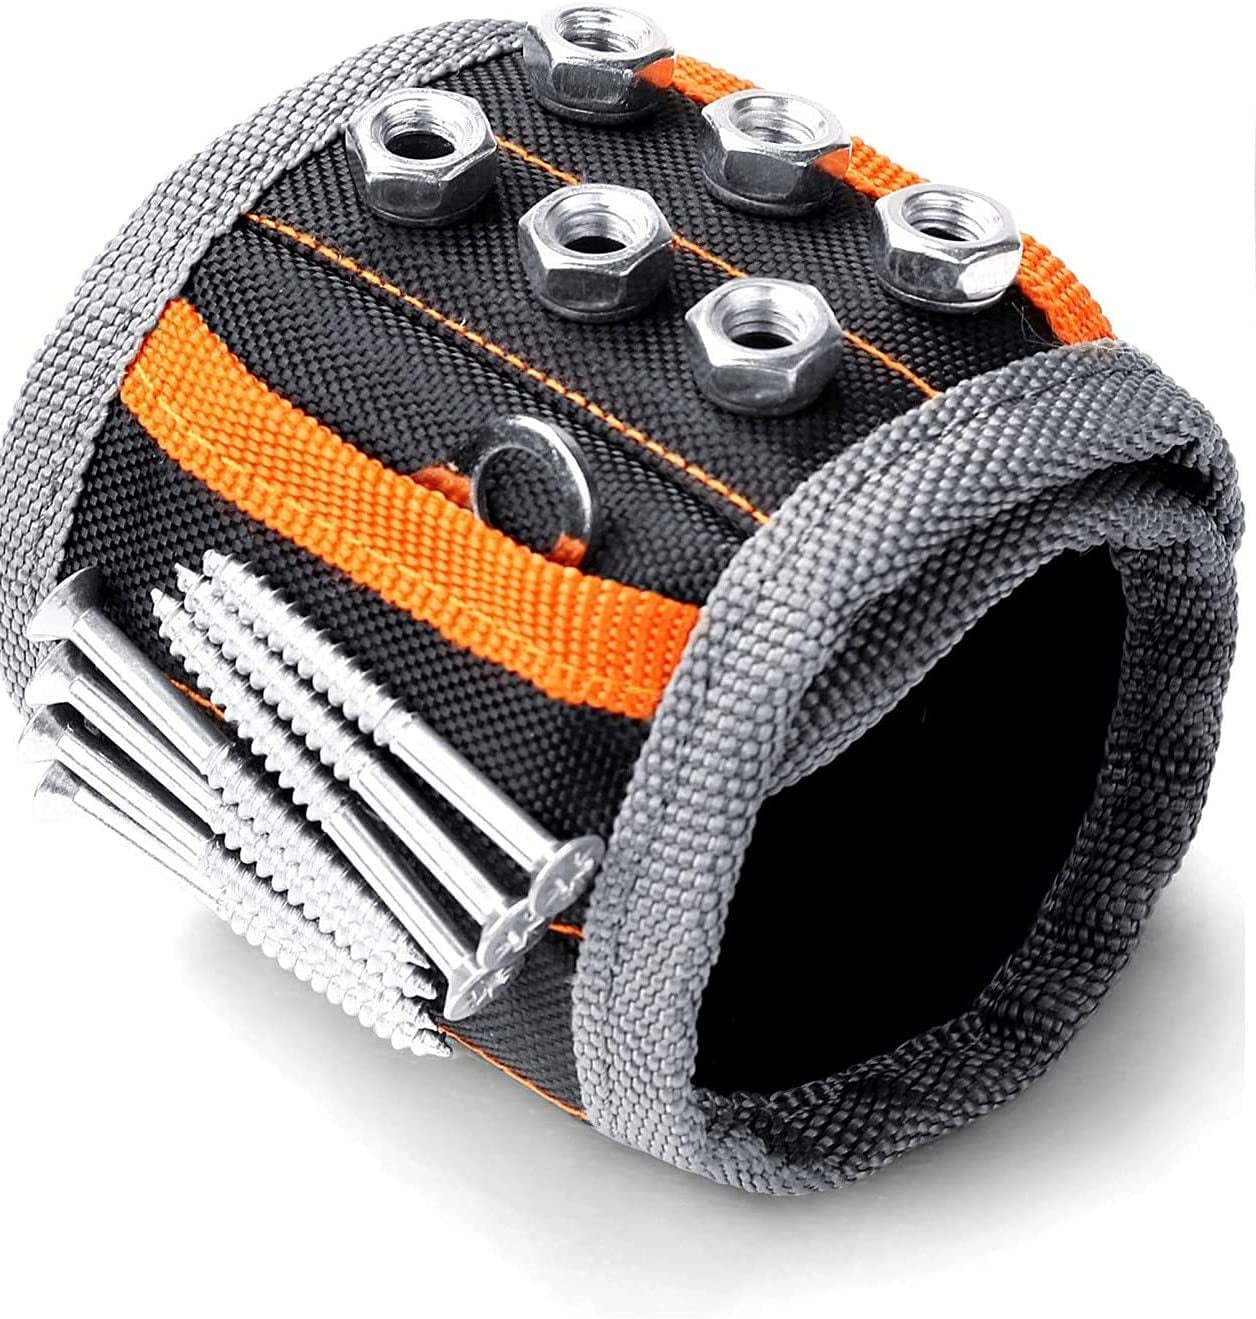 secretgreen.com.au, Magnetic Wristband,With Strong Magnets for Holding Screws, Nails, Drilling Bits,Magnetic Wristband with 2 Pockets,Tool Belt with 10 Strong Magnets,For Holding Screws,Ails,Drill,Bits (10 Strong Magnets)